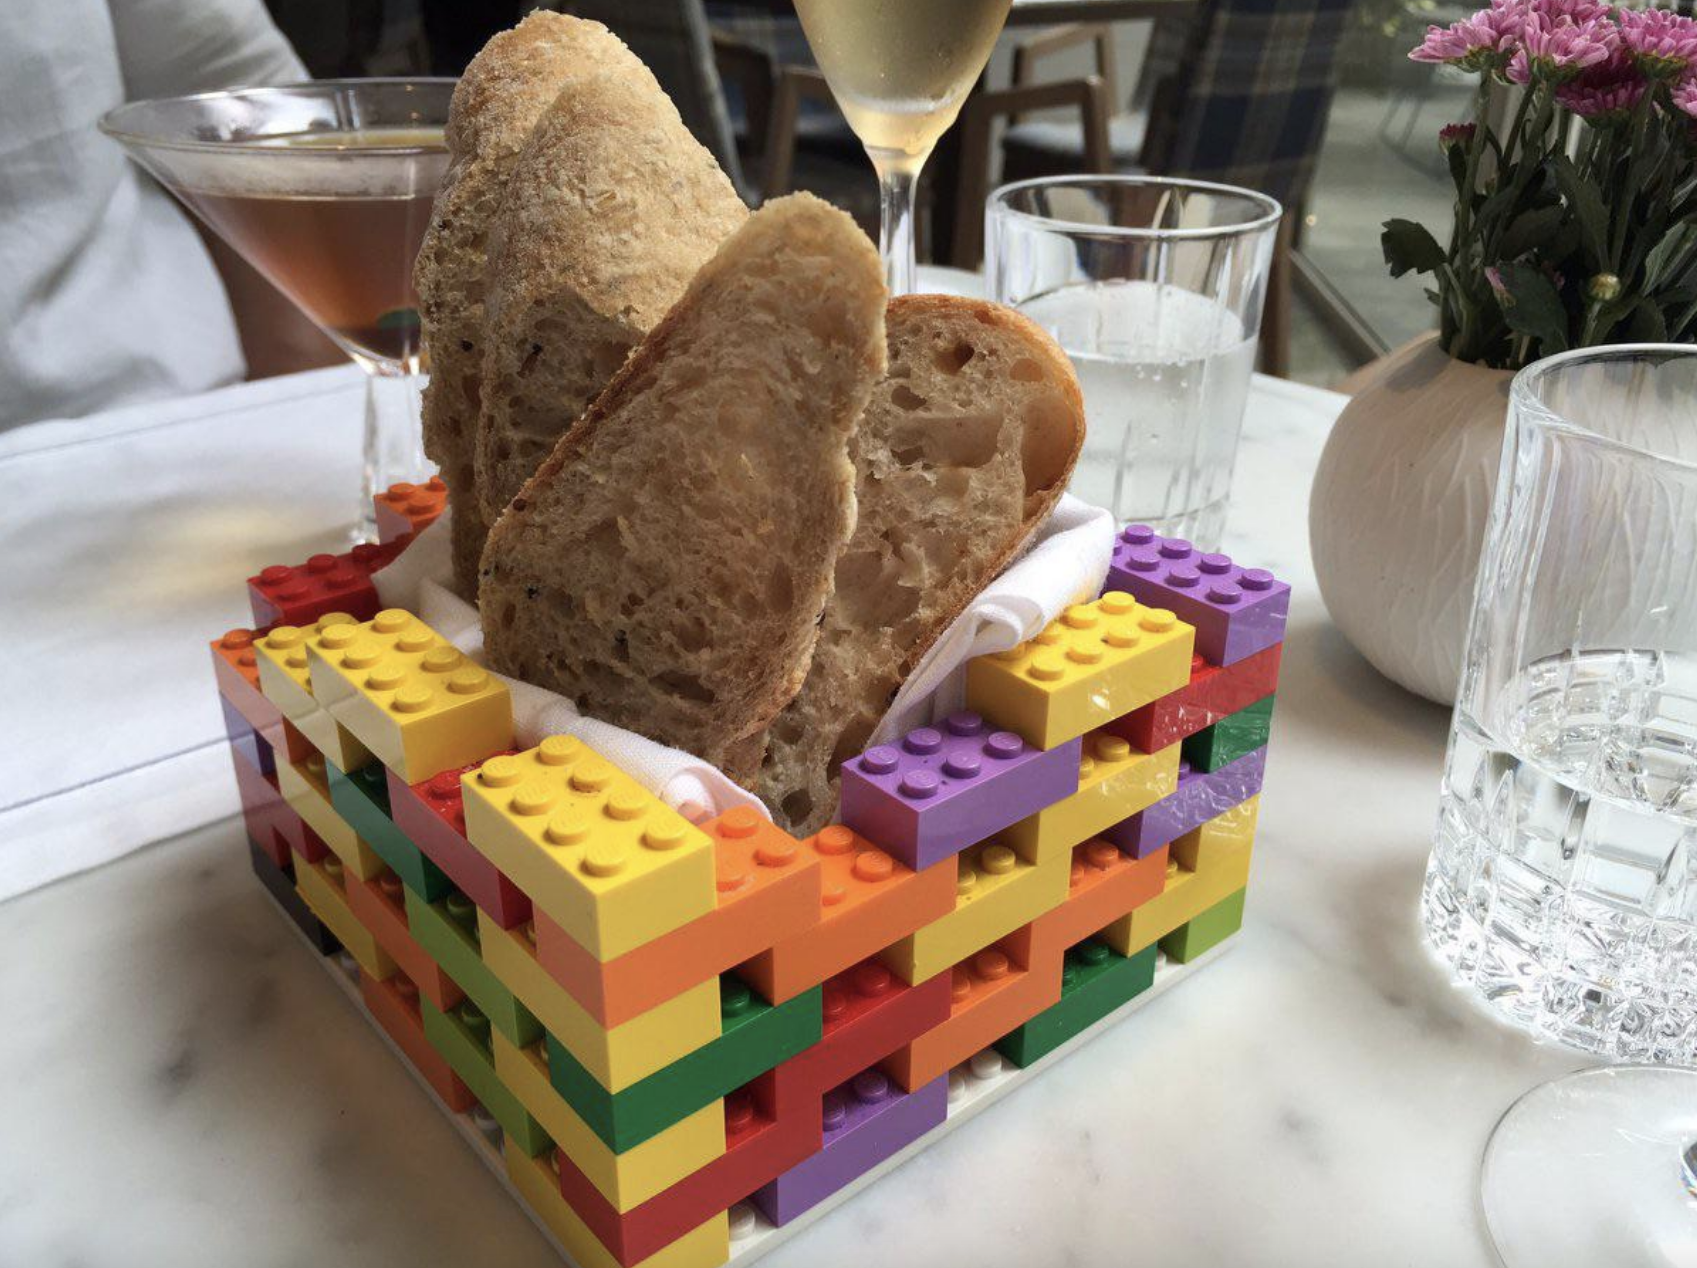 A bread basket made out of Legos